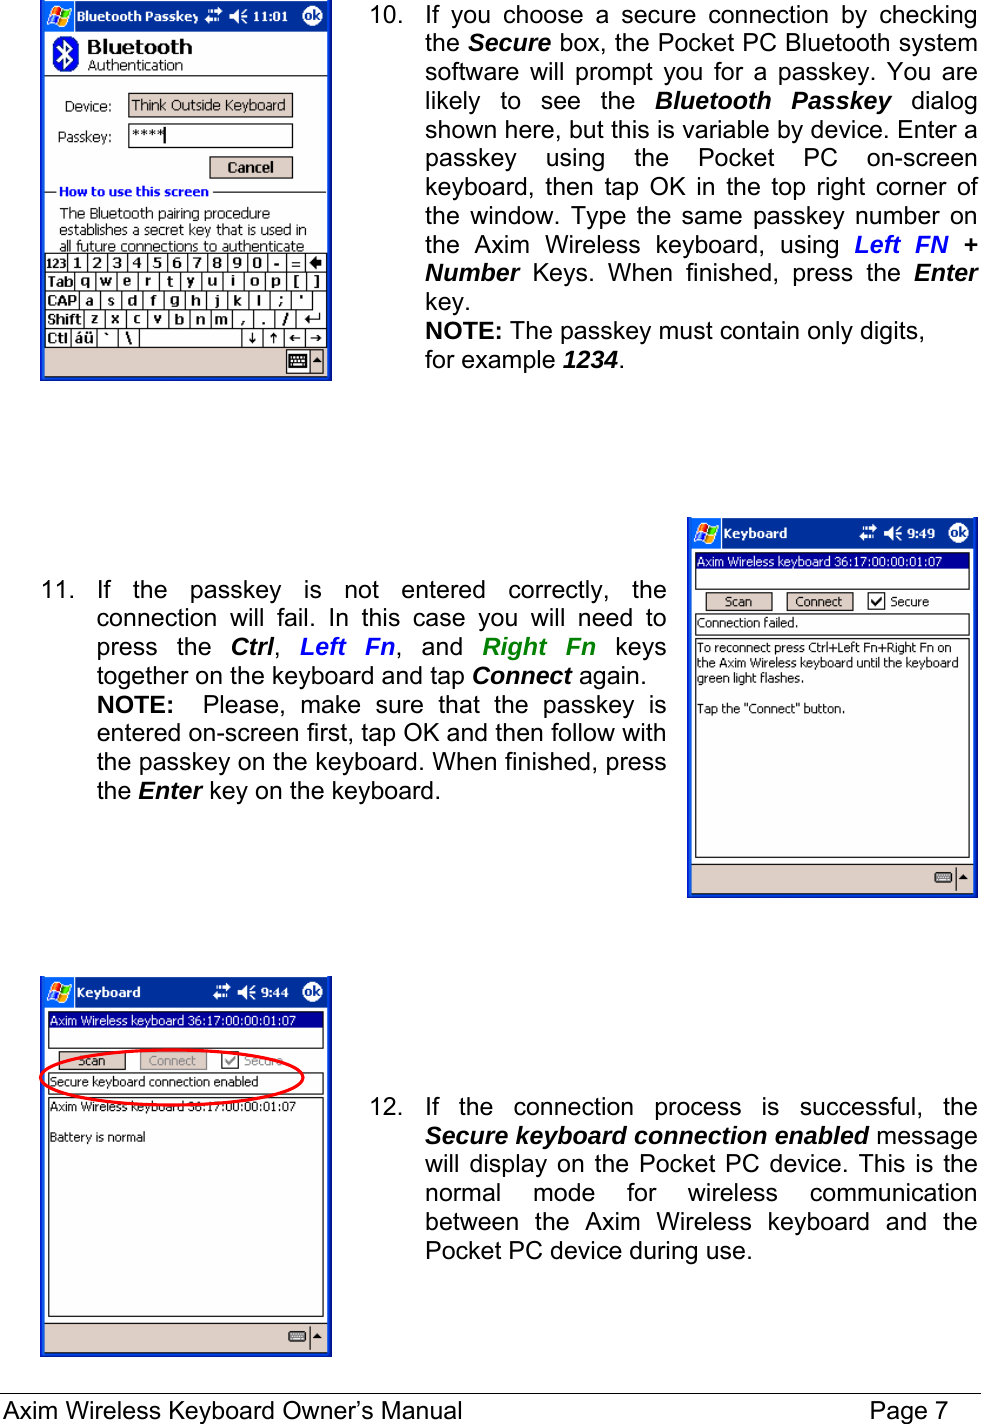 10.  If you choose a secure connection by checking the Secure box, the Pocket PC Bluetooth system software will prompt you for a passkey. You are likely to see the Bluetooth Passkey dialog shown here, but this is variable by device. Enter a passkey using the Pocket PC on-screen keyboard, then tap OK in the top right corner of the window. Type the same passkey number on the Axim Wireless keyboard, using Left FN + Number Keys. When finished, press the Enter key. NOTE: The passkey must contain only digits,  for example 1234.        11. If the passkey is not entered correctly, the connection will fail. In this case you will need to press the Ctrl,  Left Fn, and Right Fn keys together on the keyboard and tap Connect again.  NOTE:  Please, make sure that the passkey is entered on-screen first, tap OK and then follow with the passkey on the keyboard. When finished, press the Enter key on the keyboard.           12. If the connection process is successful, the Secure keyboard connection enabled message will display on the Pocket PC device. This is the normal mode for wireless communication between the Axim Wireless keyboard and the Pocket PC device during use.    Axim Wireless Keyboard Owner’s Manual                                                                 Page 7 